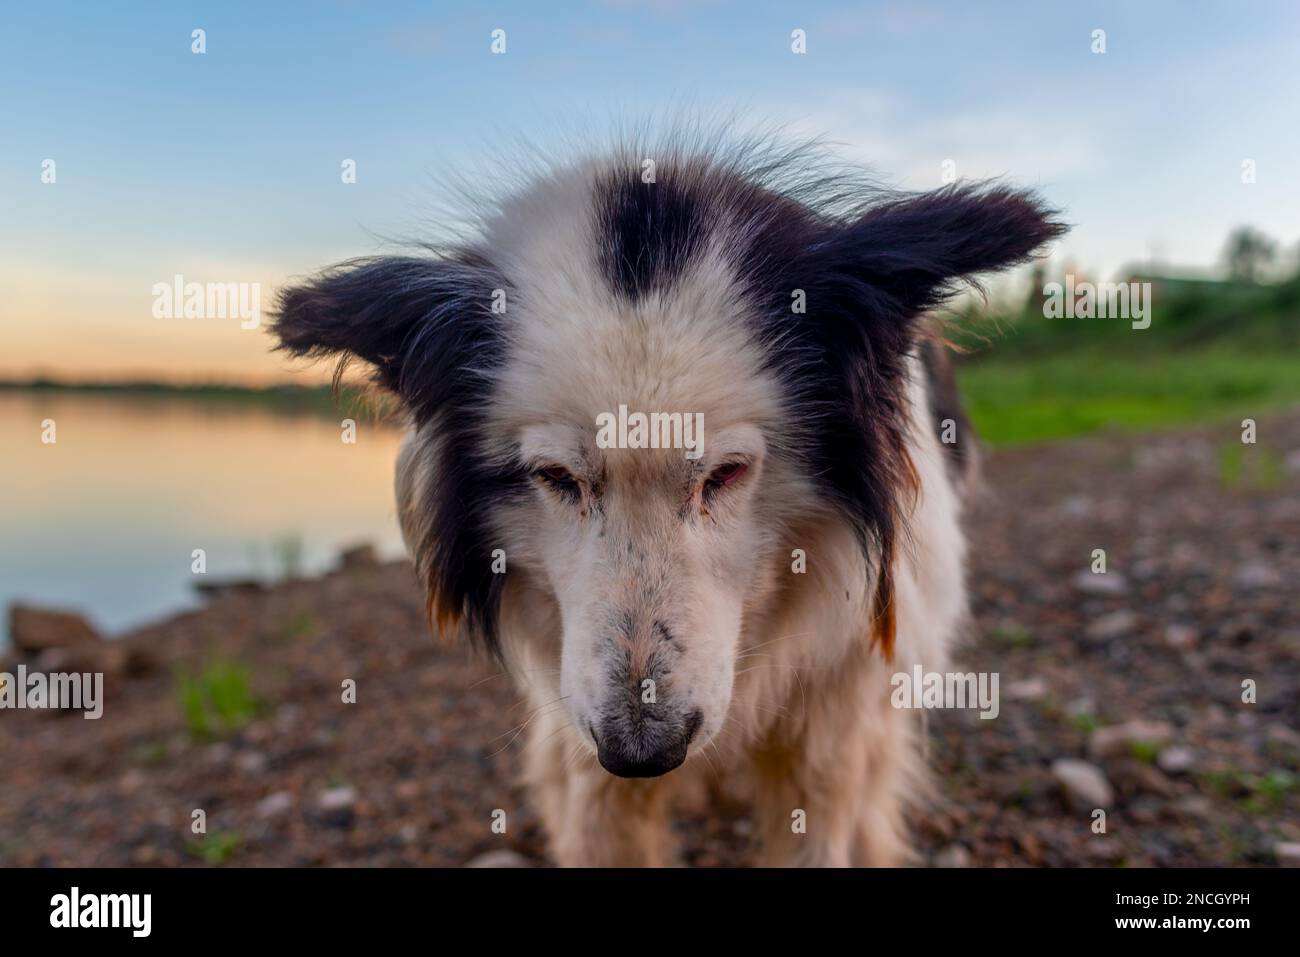 An old white dog standing with his head bowed and his eyes downcast sadly feeling guilty on the river bank in Yakutia during the day. Stock Photo